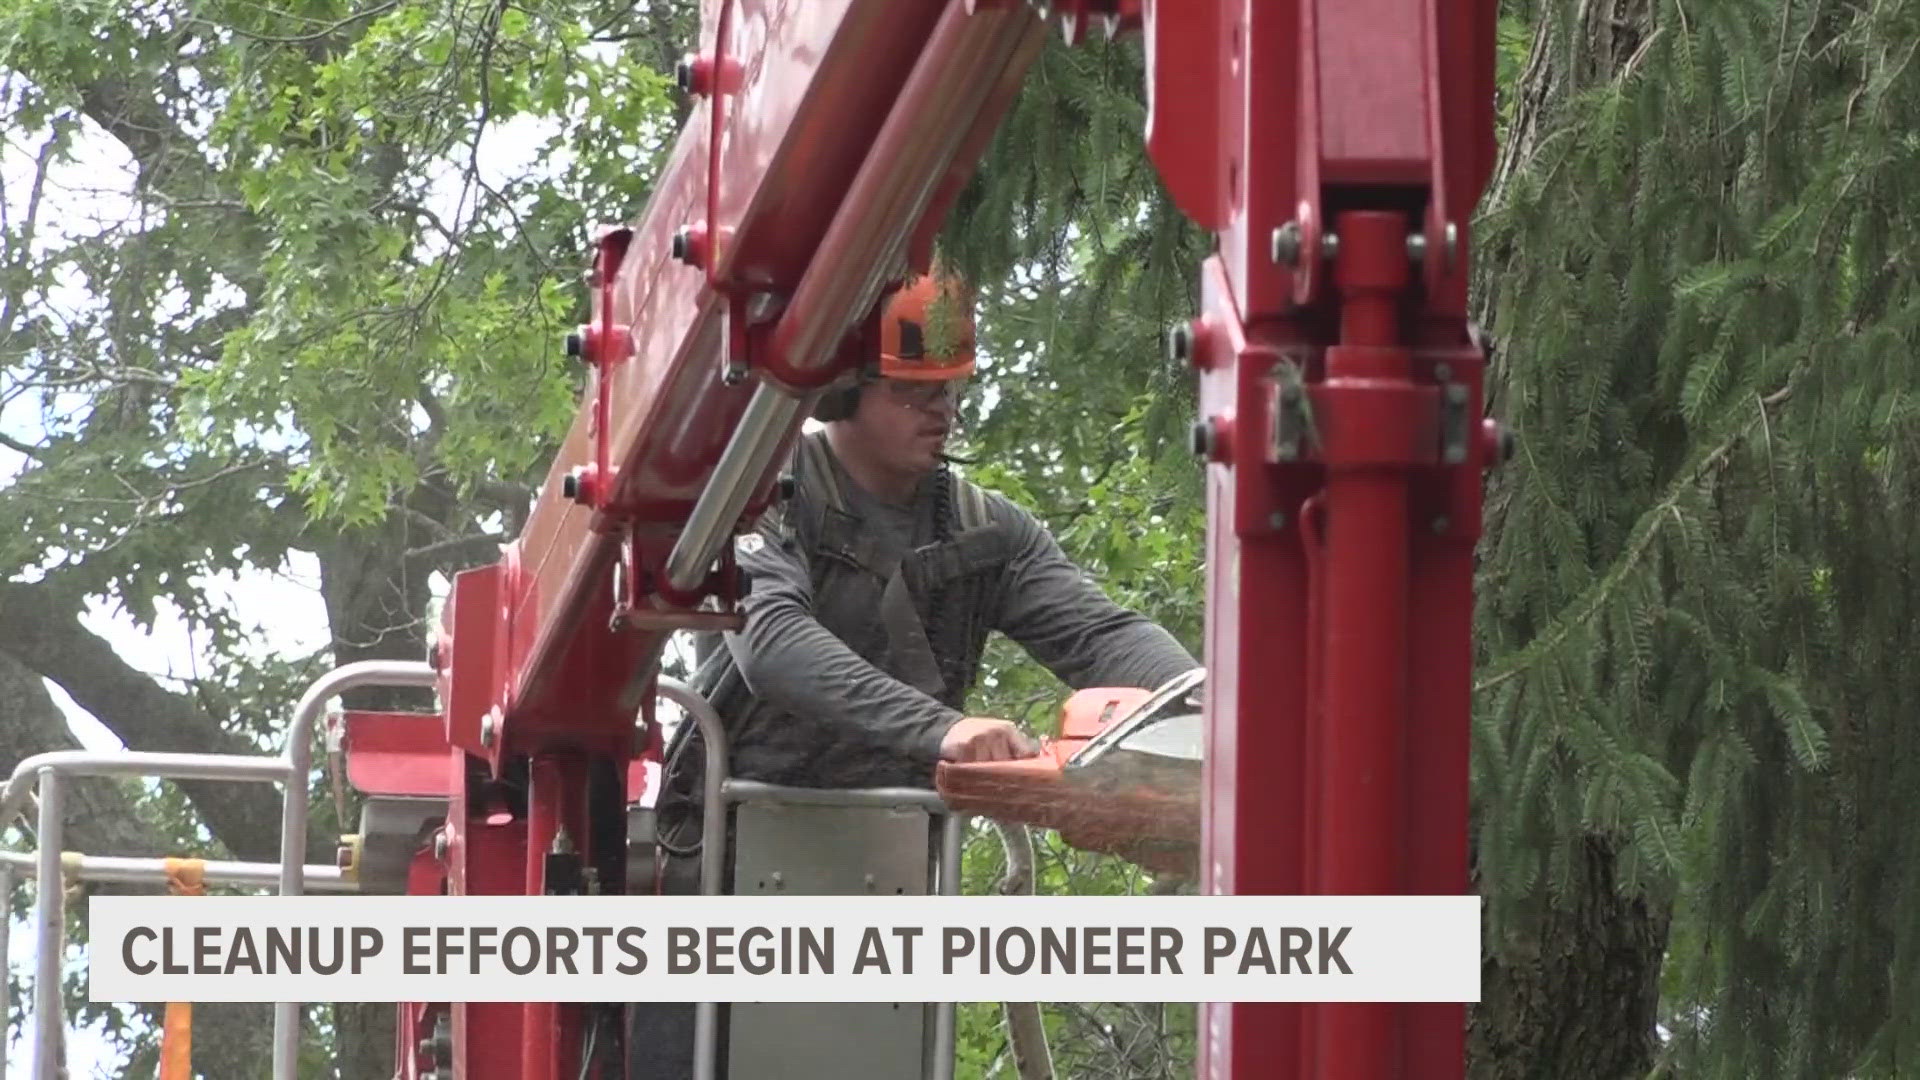 Pioneer Park employees were busy the day after strong storms uprooted trees and knocked out power to the lakeshore.